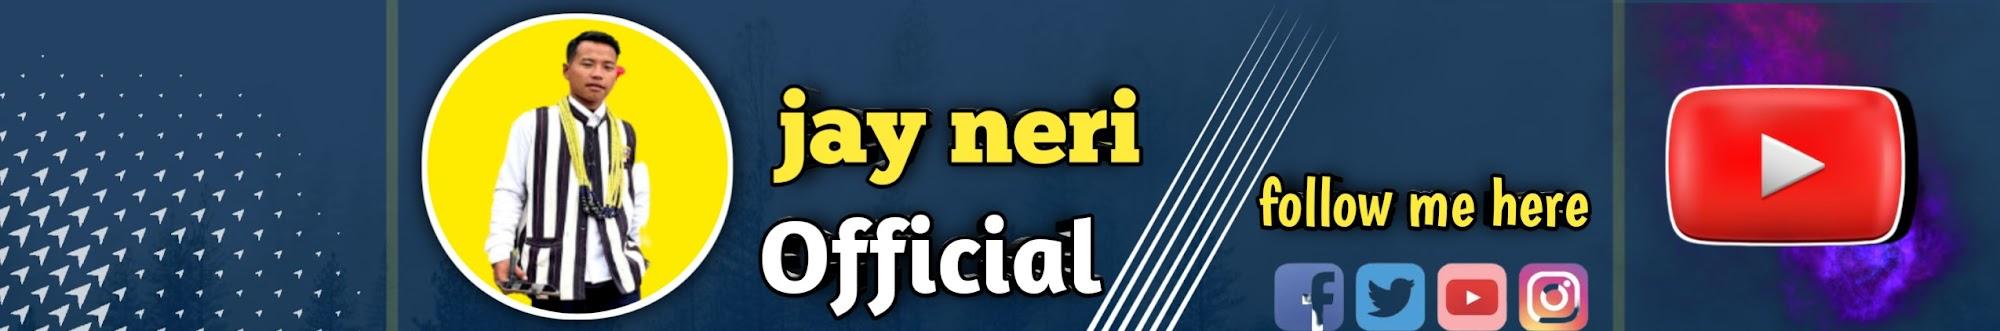 jay neri official